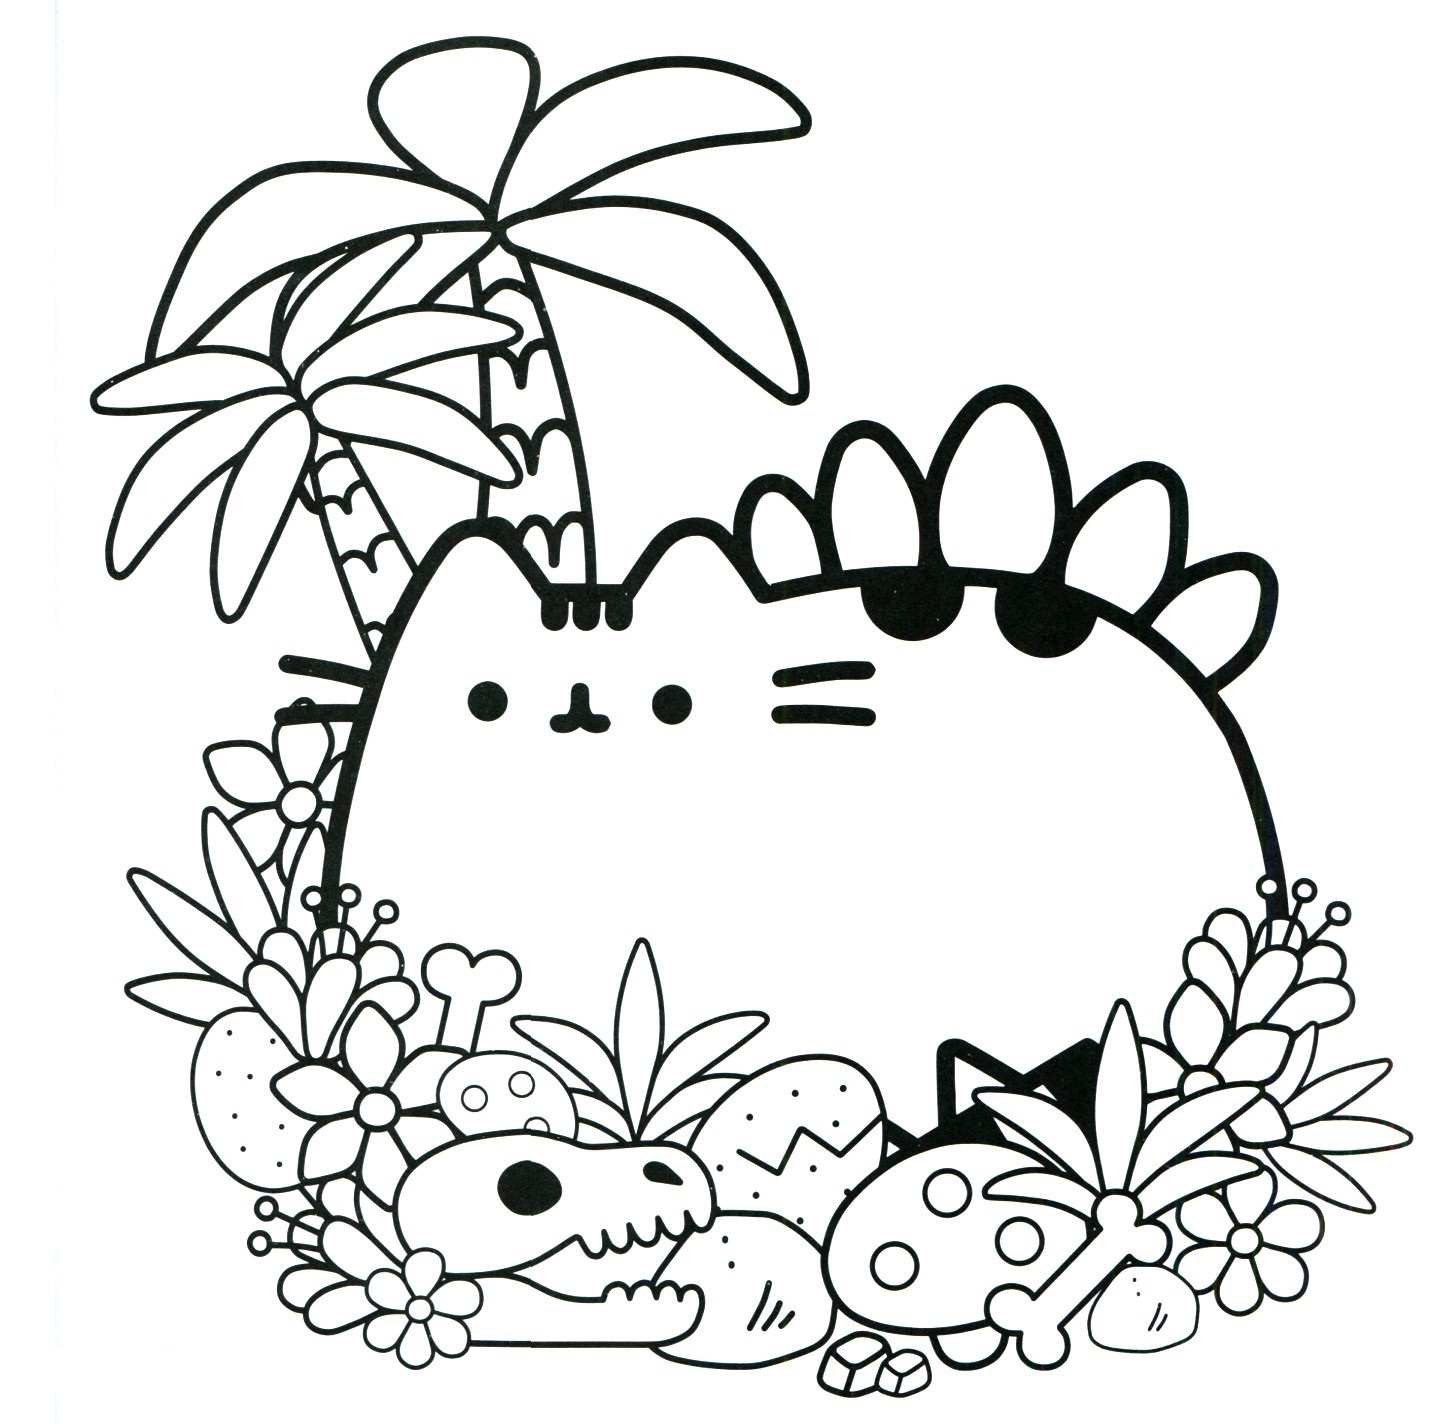 Download Cute Pusheen Coloring Page - Free Printable Coloring Pages for Kids